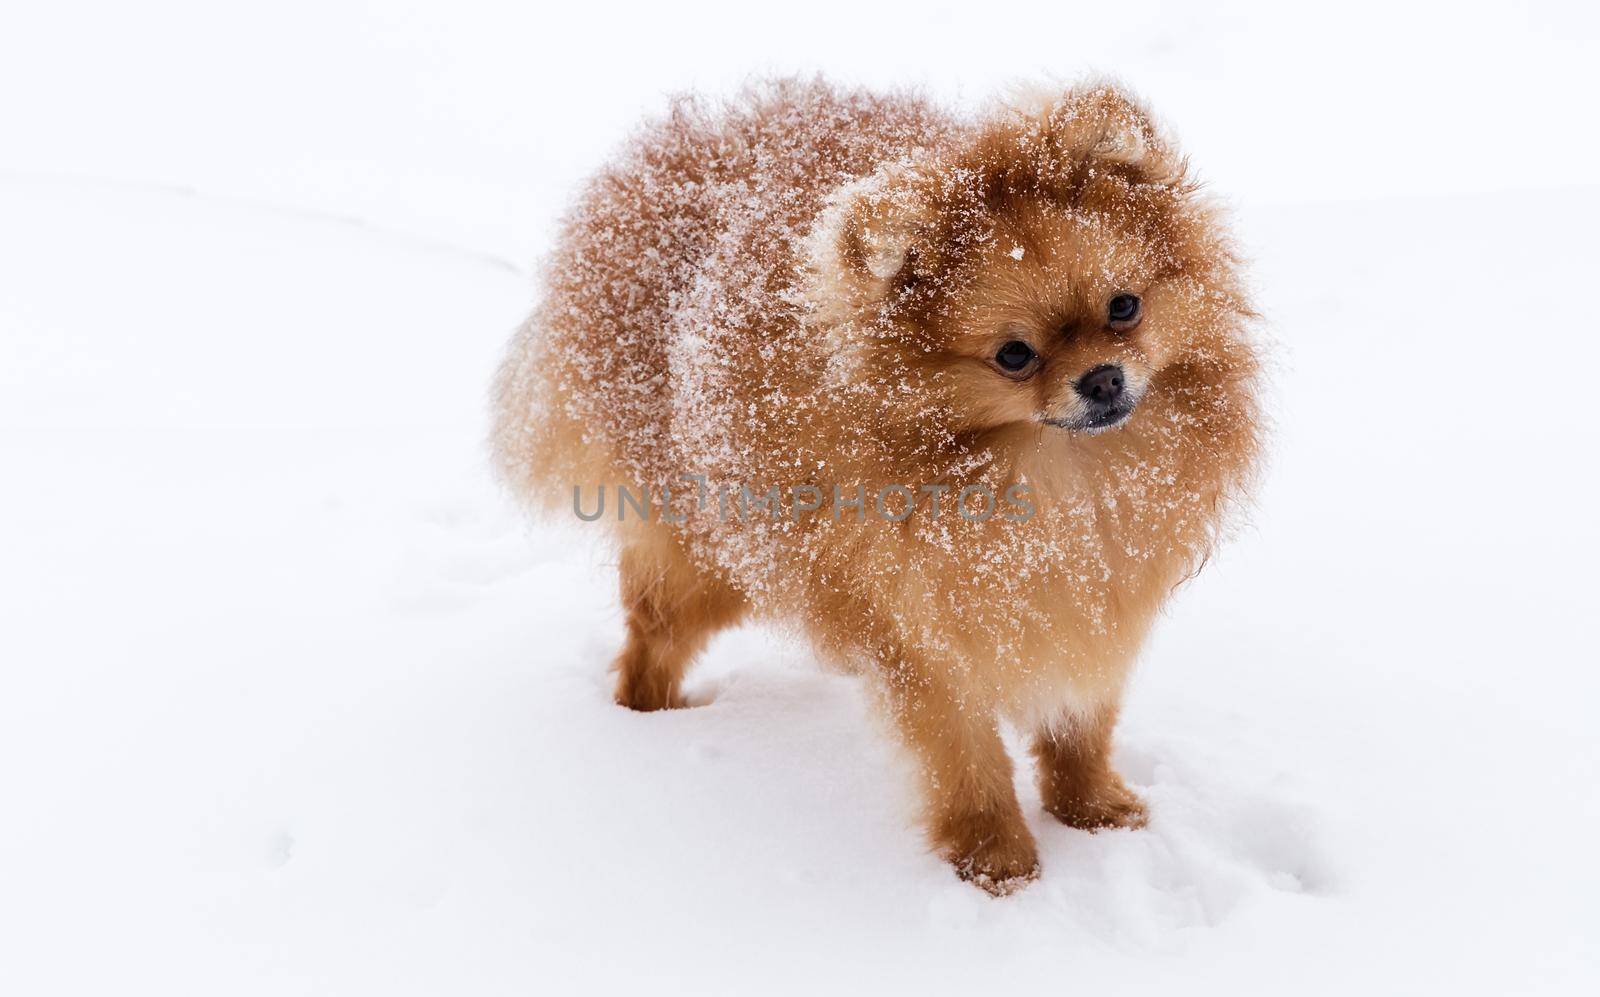 Cute dog breeds Spitz on a walk in winter in the snow. Reference picture.